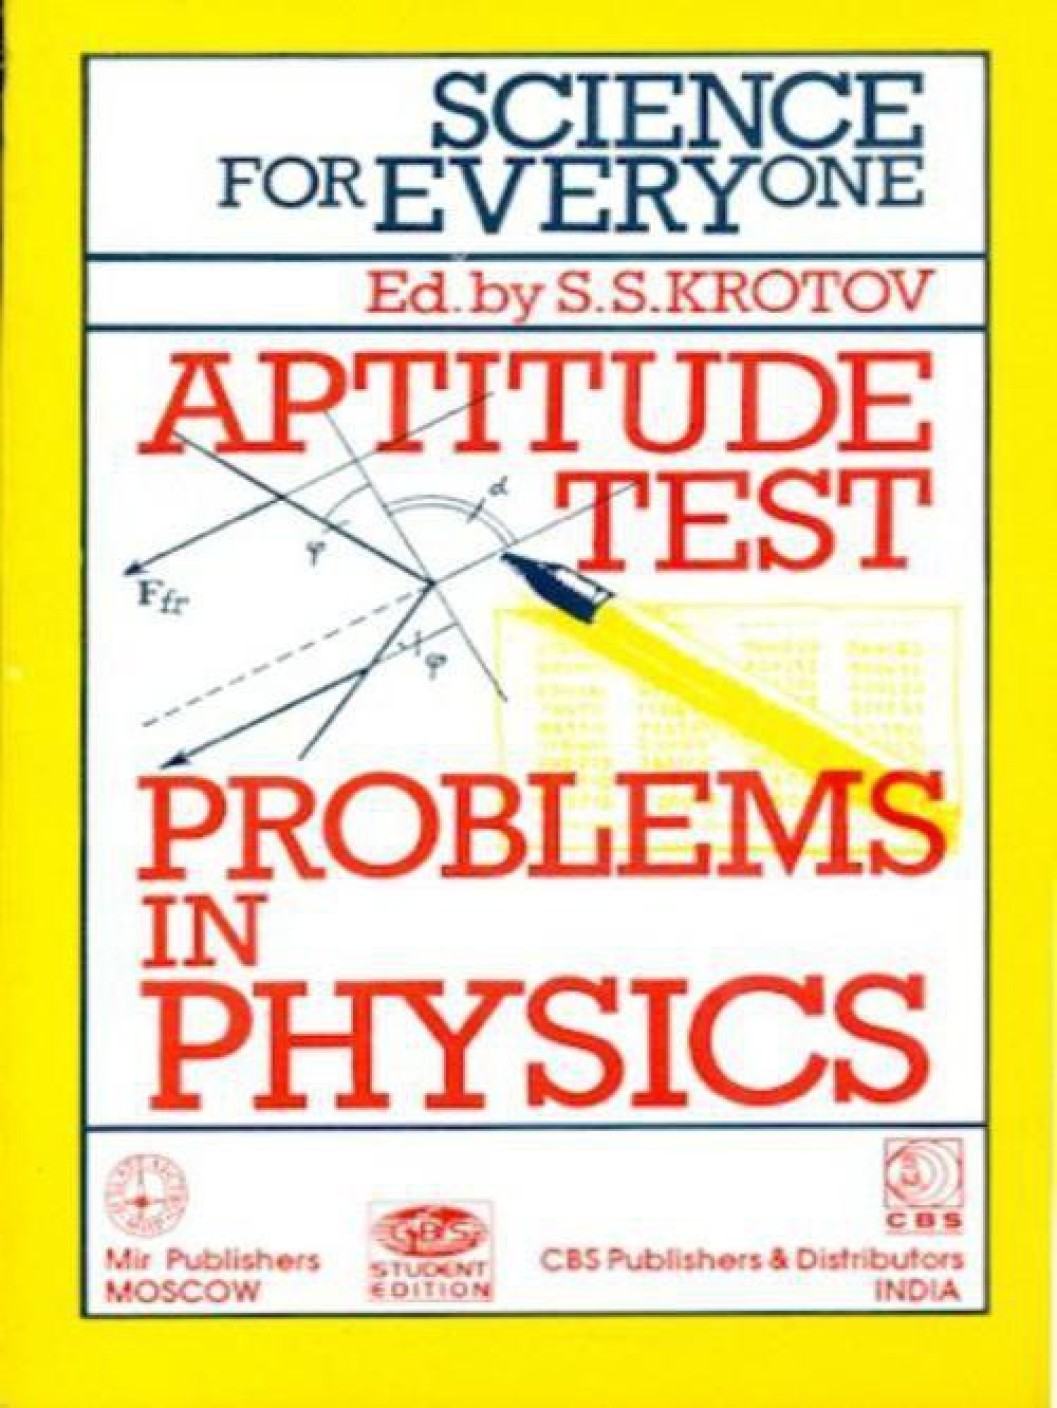 science-for-everyone-aptitude-test-problems-in-physics-1st-edition-buy-science-for-everyone